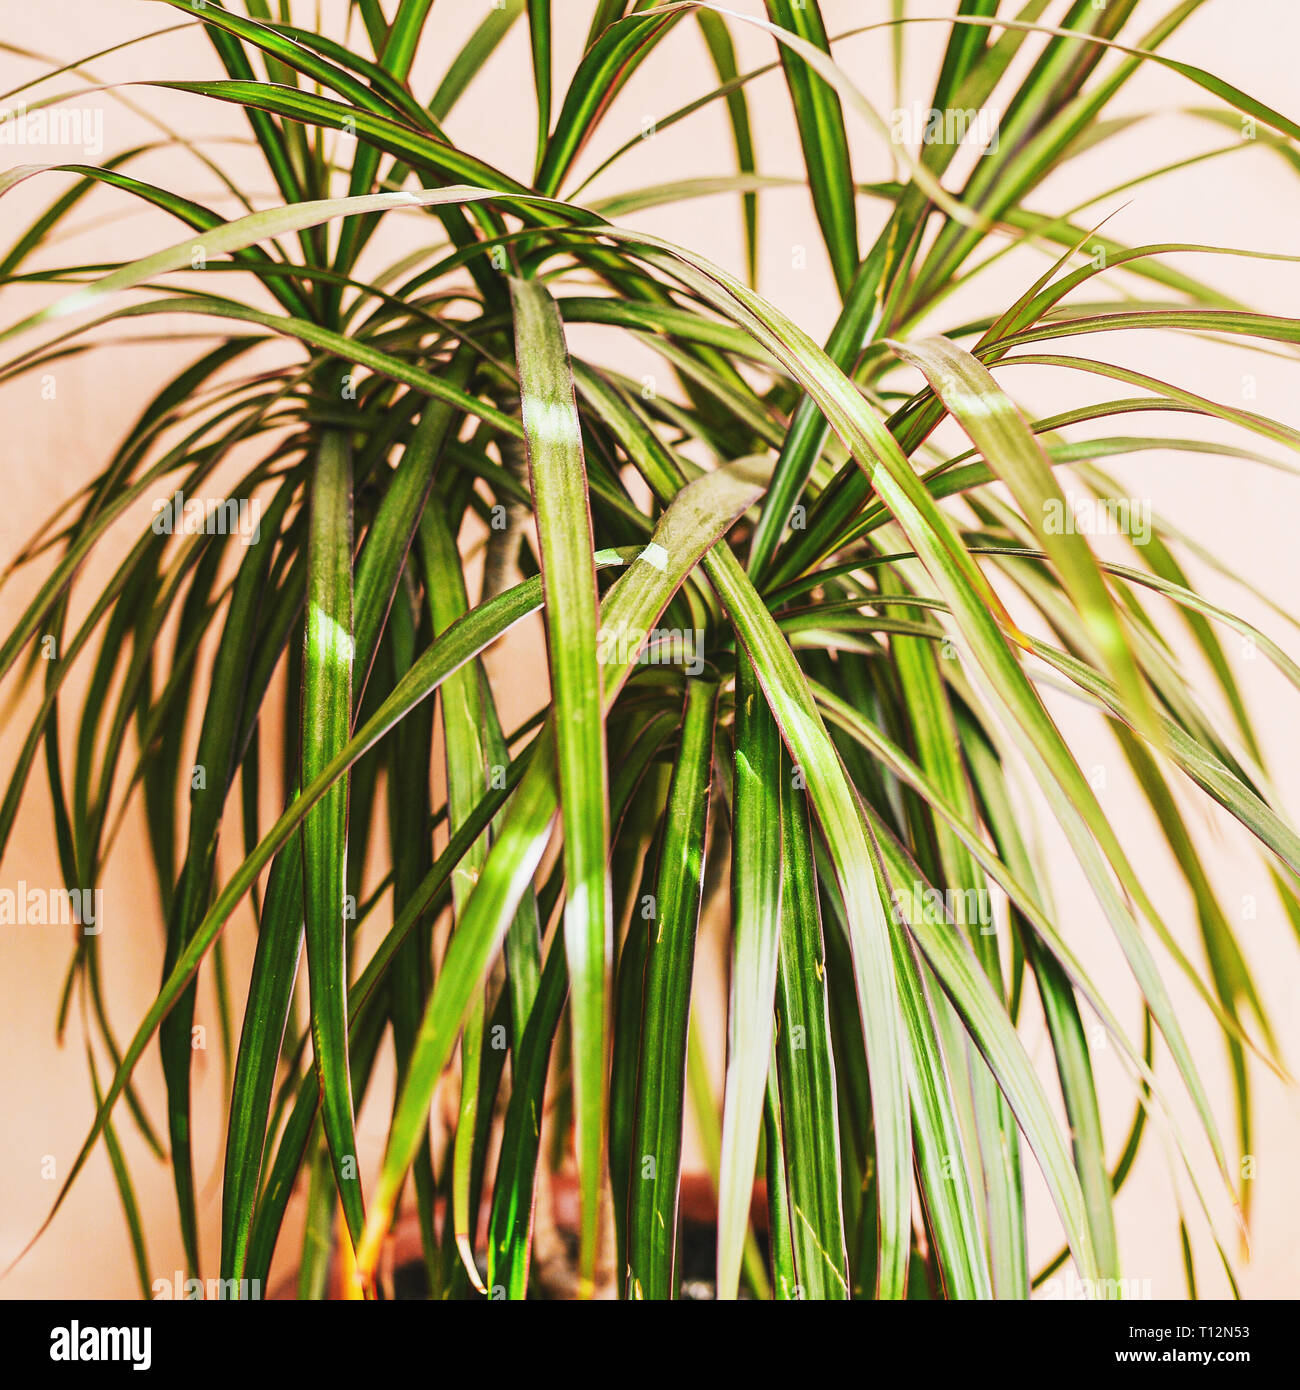 Long green leaves against a pink wall. Houseplant, dracaena. Interior design Stock Photo